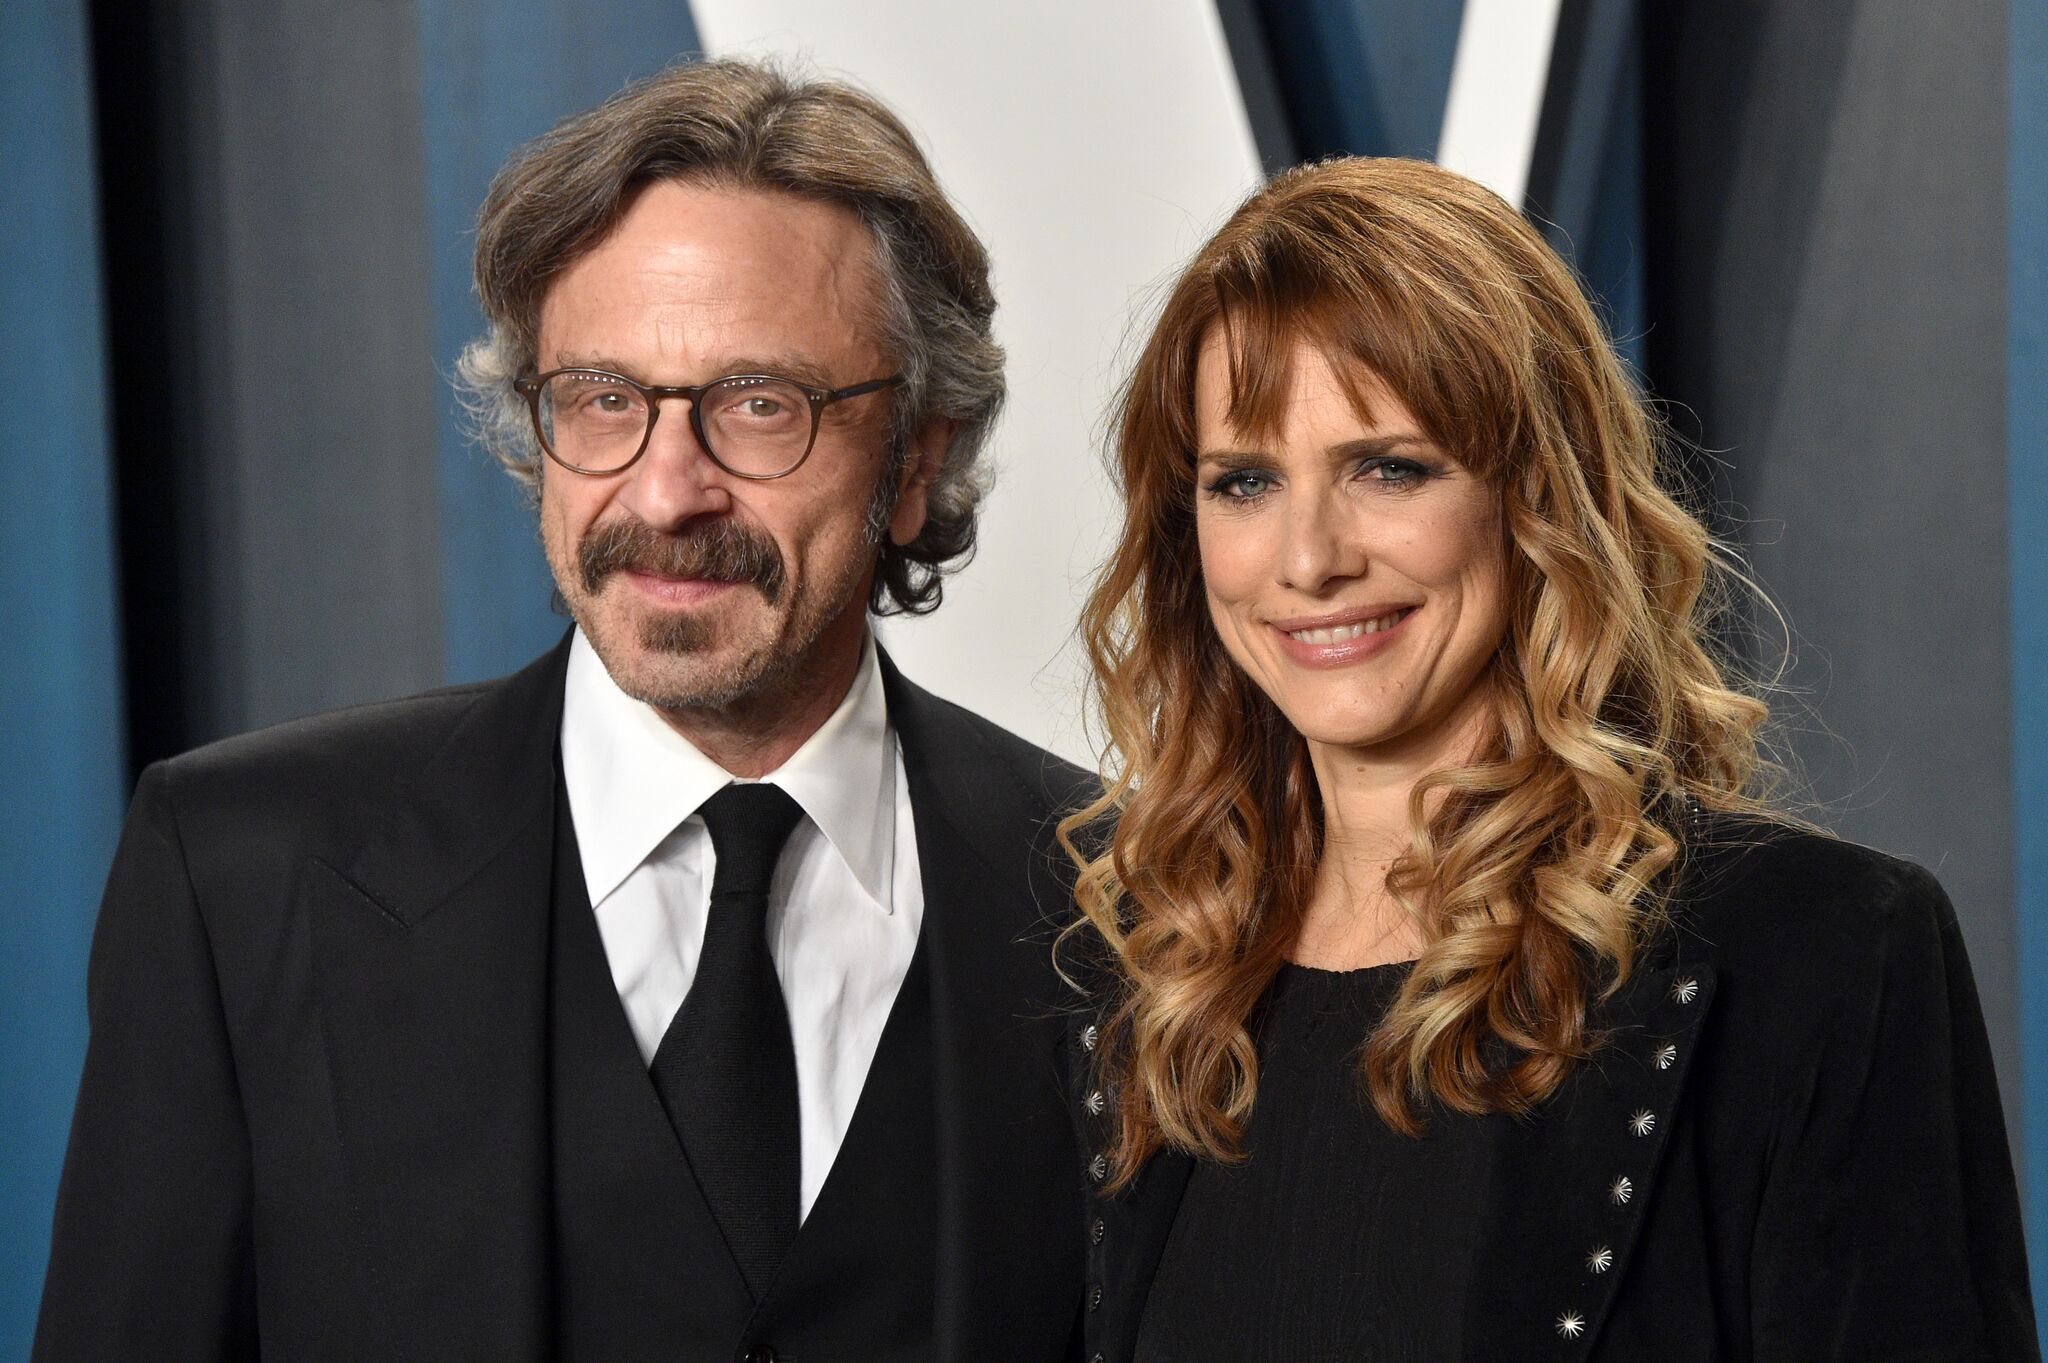 Marc Maron and Lynn Shelton at the 2020 Vanity Fair Oscar Party on February 09, 2020. | Photo: Getty Images